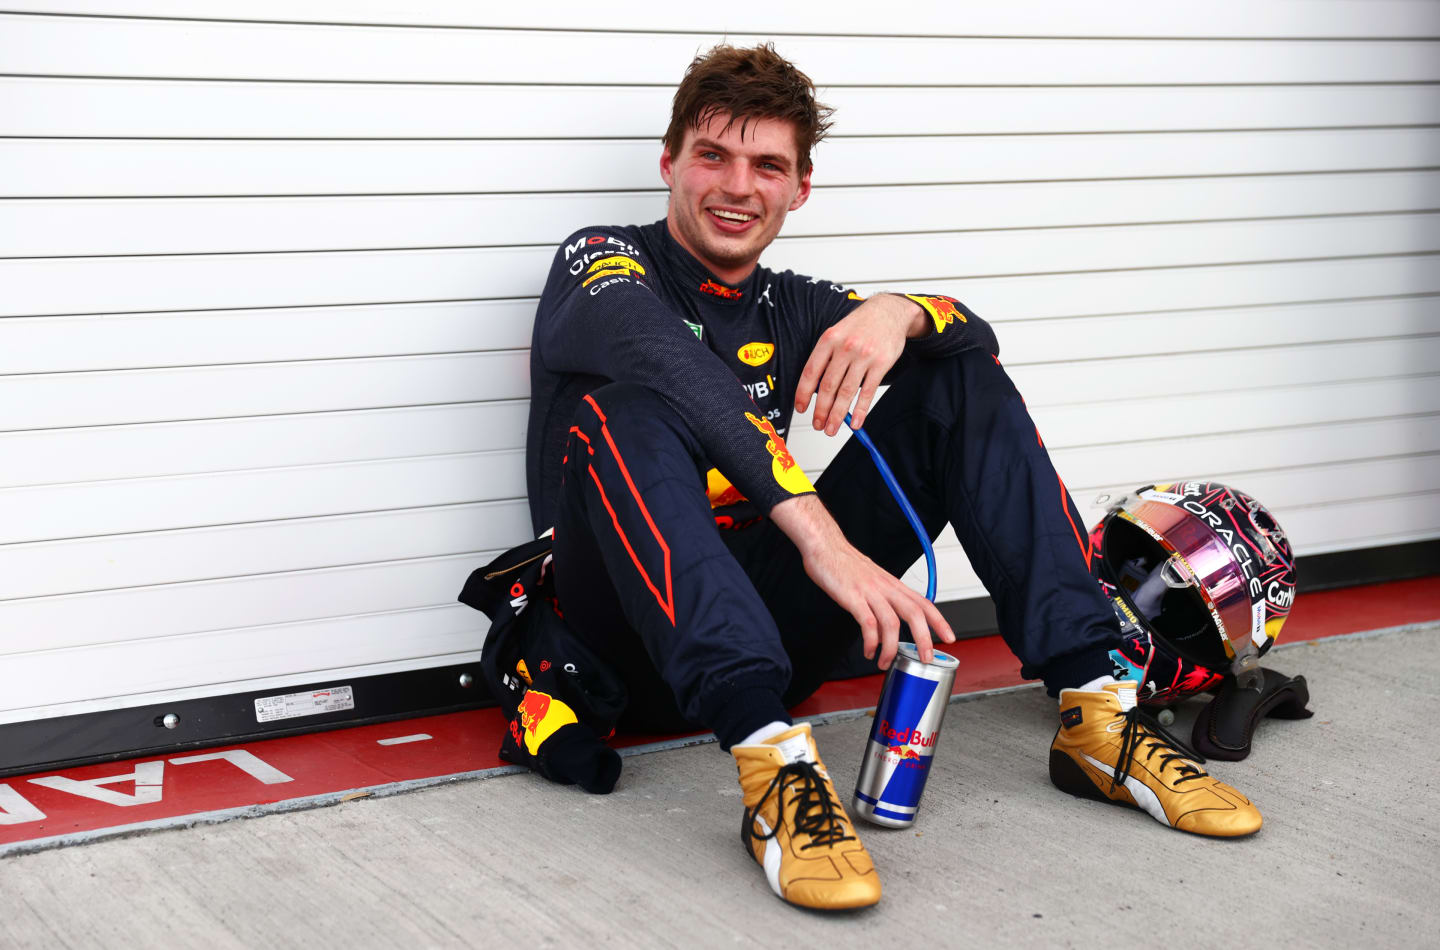 MIAMI, FLORIDA - MAY 08: Race winner Max Verstappen of the Netherlands and Oracle Red Bull Racing celebrates in parc ferme during the F1 Grand Prix of Miami at the Miami International Autodrome on May 08, 2022 in Miami, Florida. (Photo by Dan Istitene - Formula 1/Formula 1 via Getty Images)